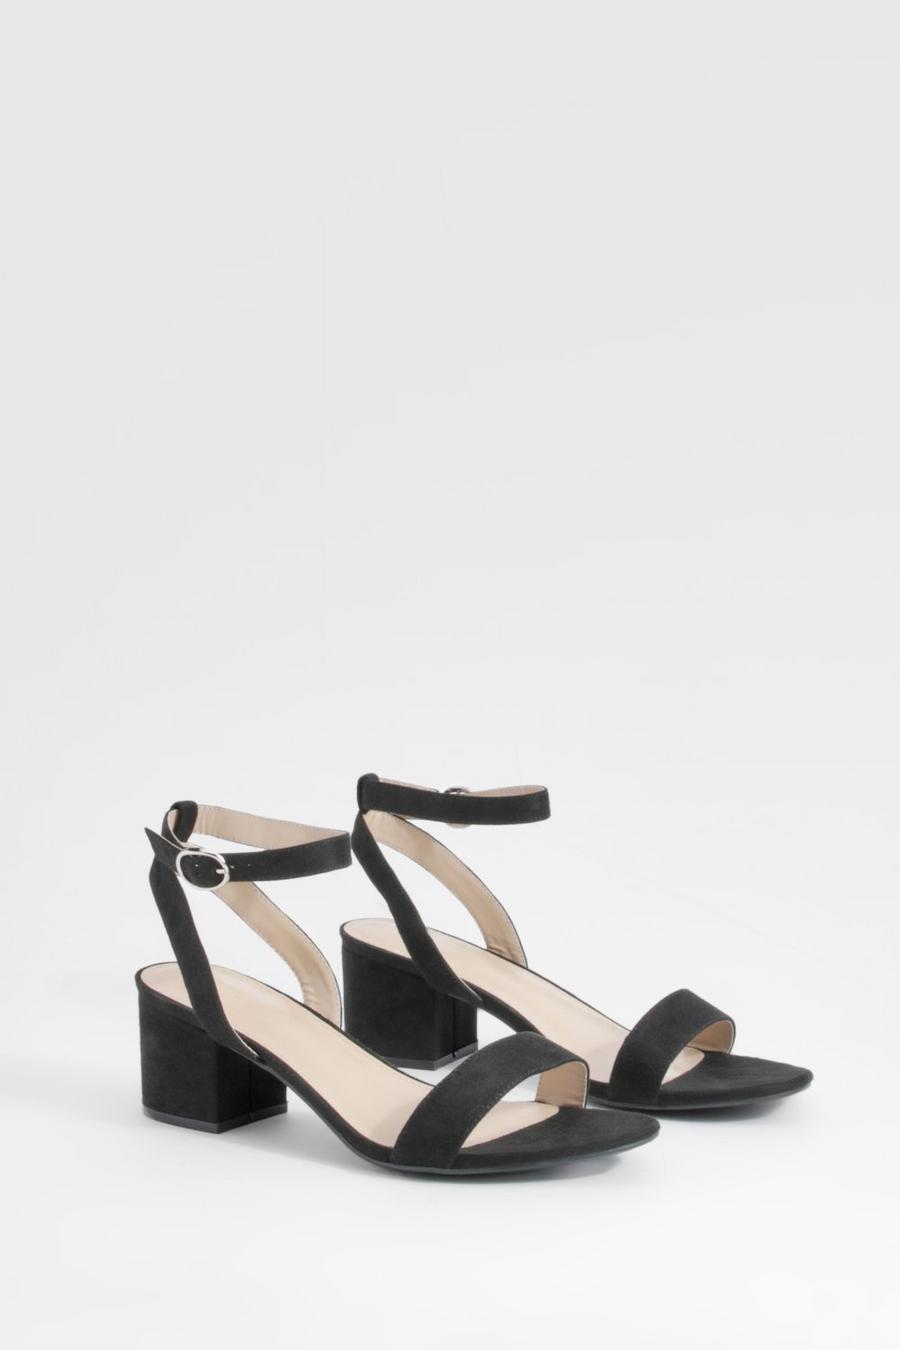 Black Wide Width Low Block Barely There Heels